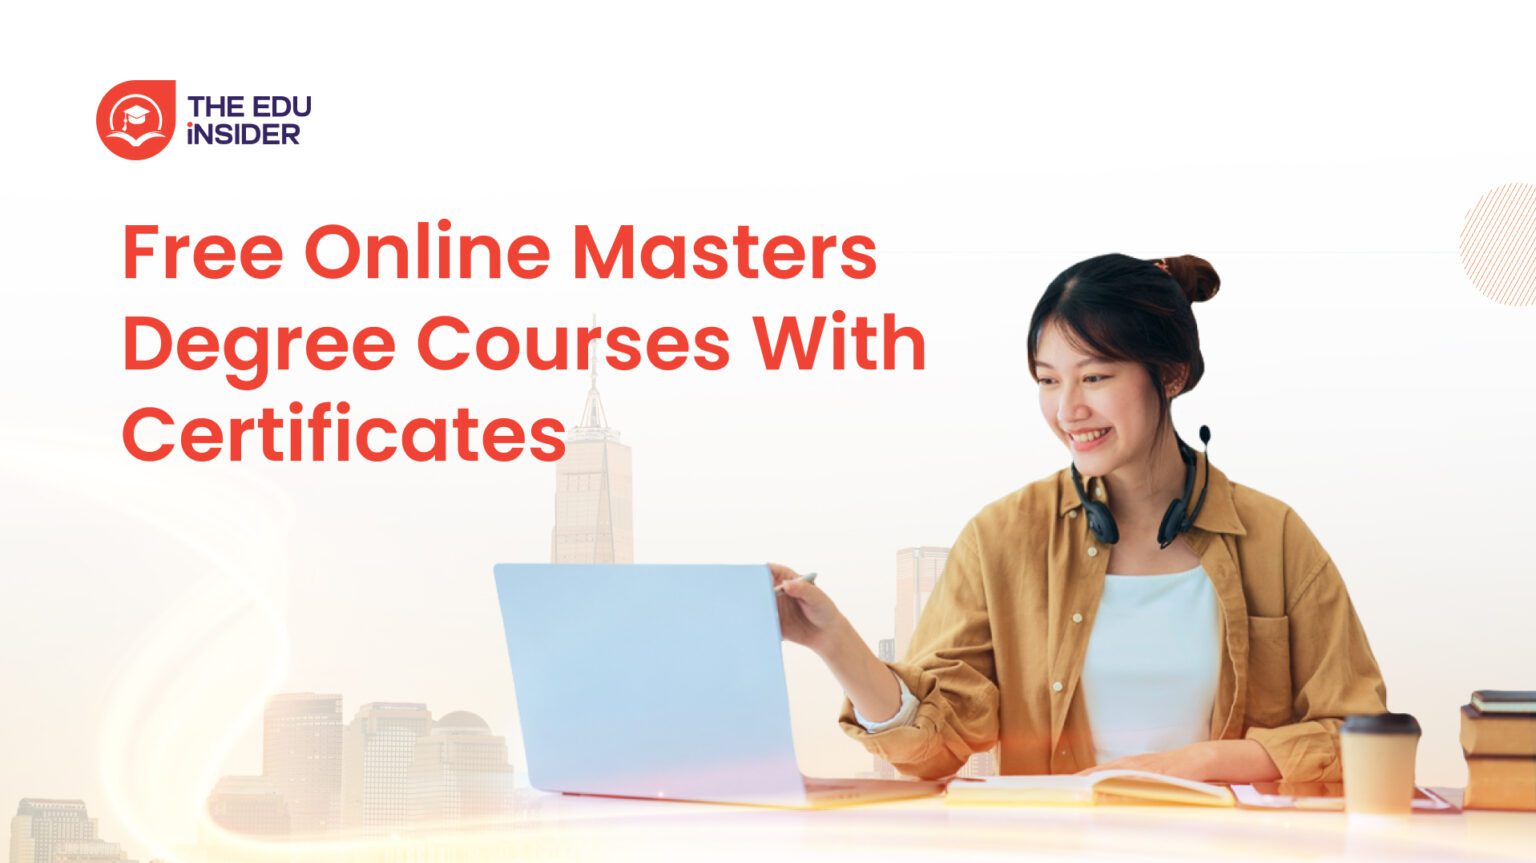 free online masters degree courses with certificates